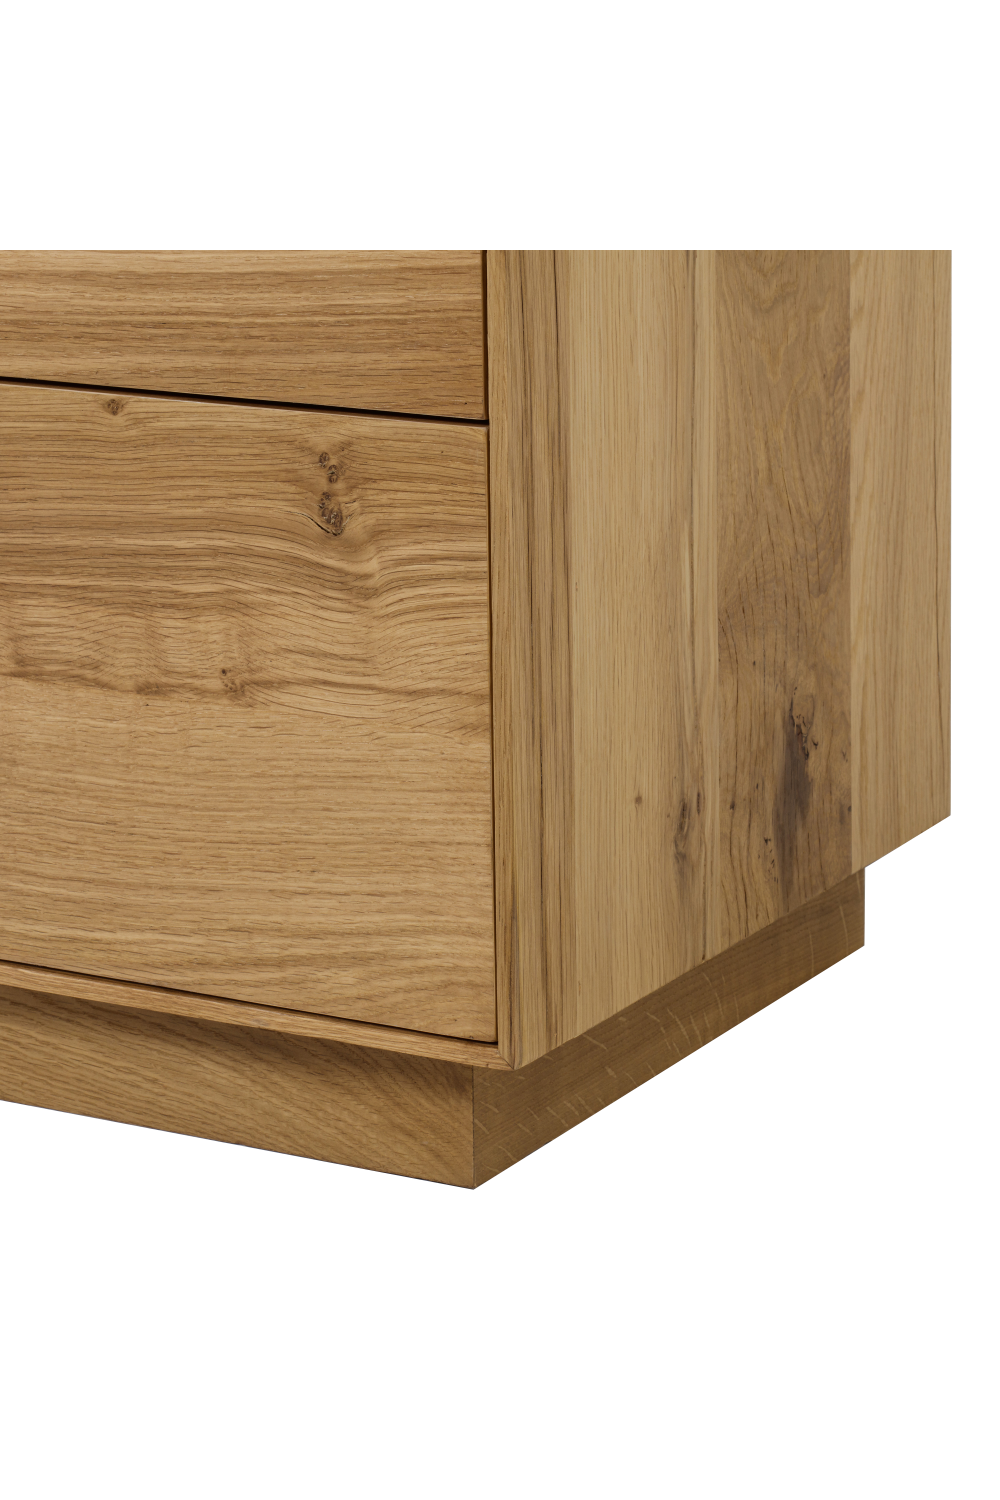 Natural Oak Two Drawer Nightstand | Andrew Martin Sands | OROA